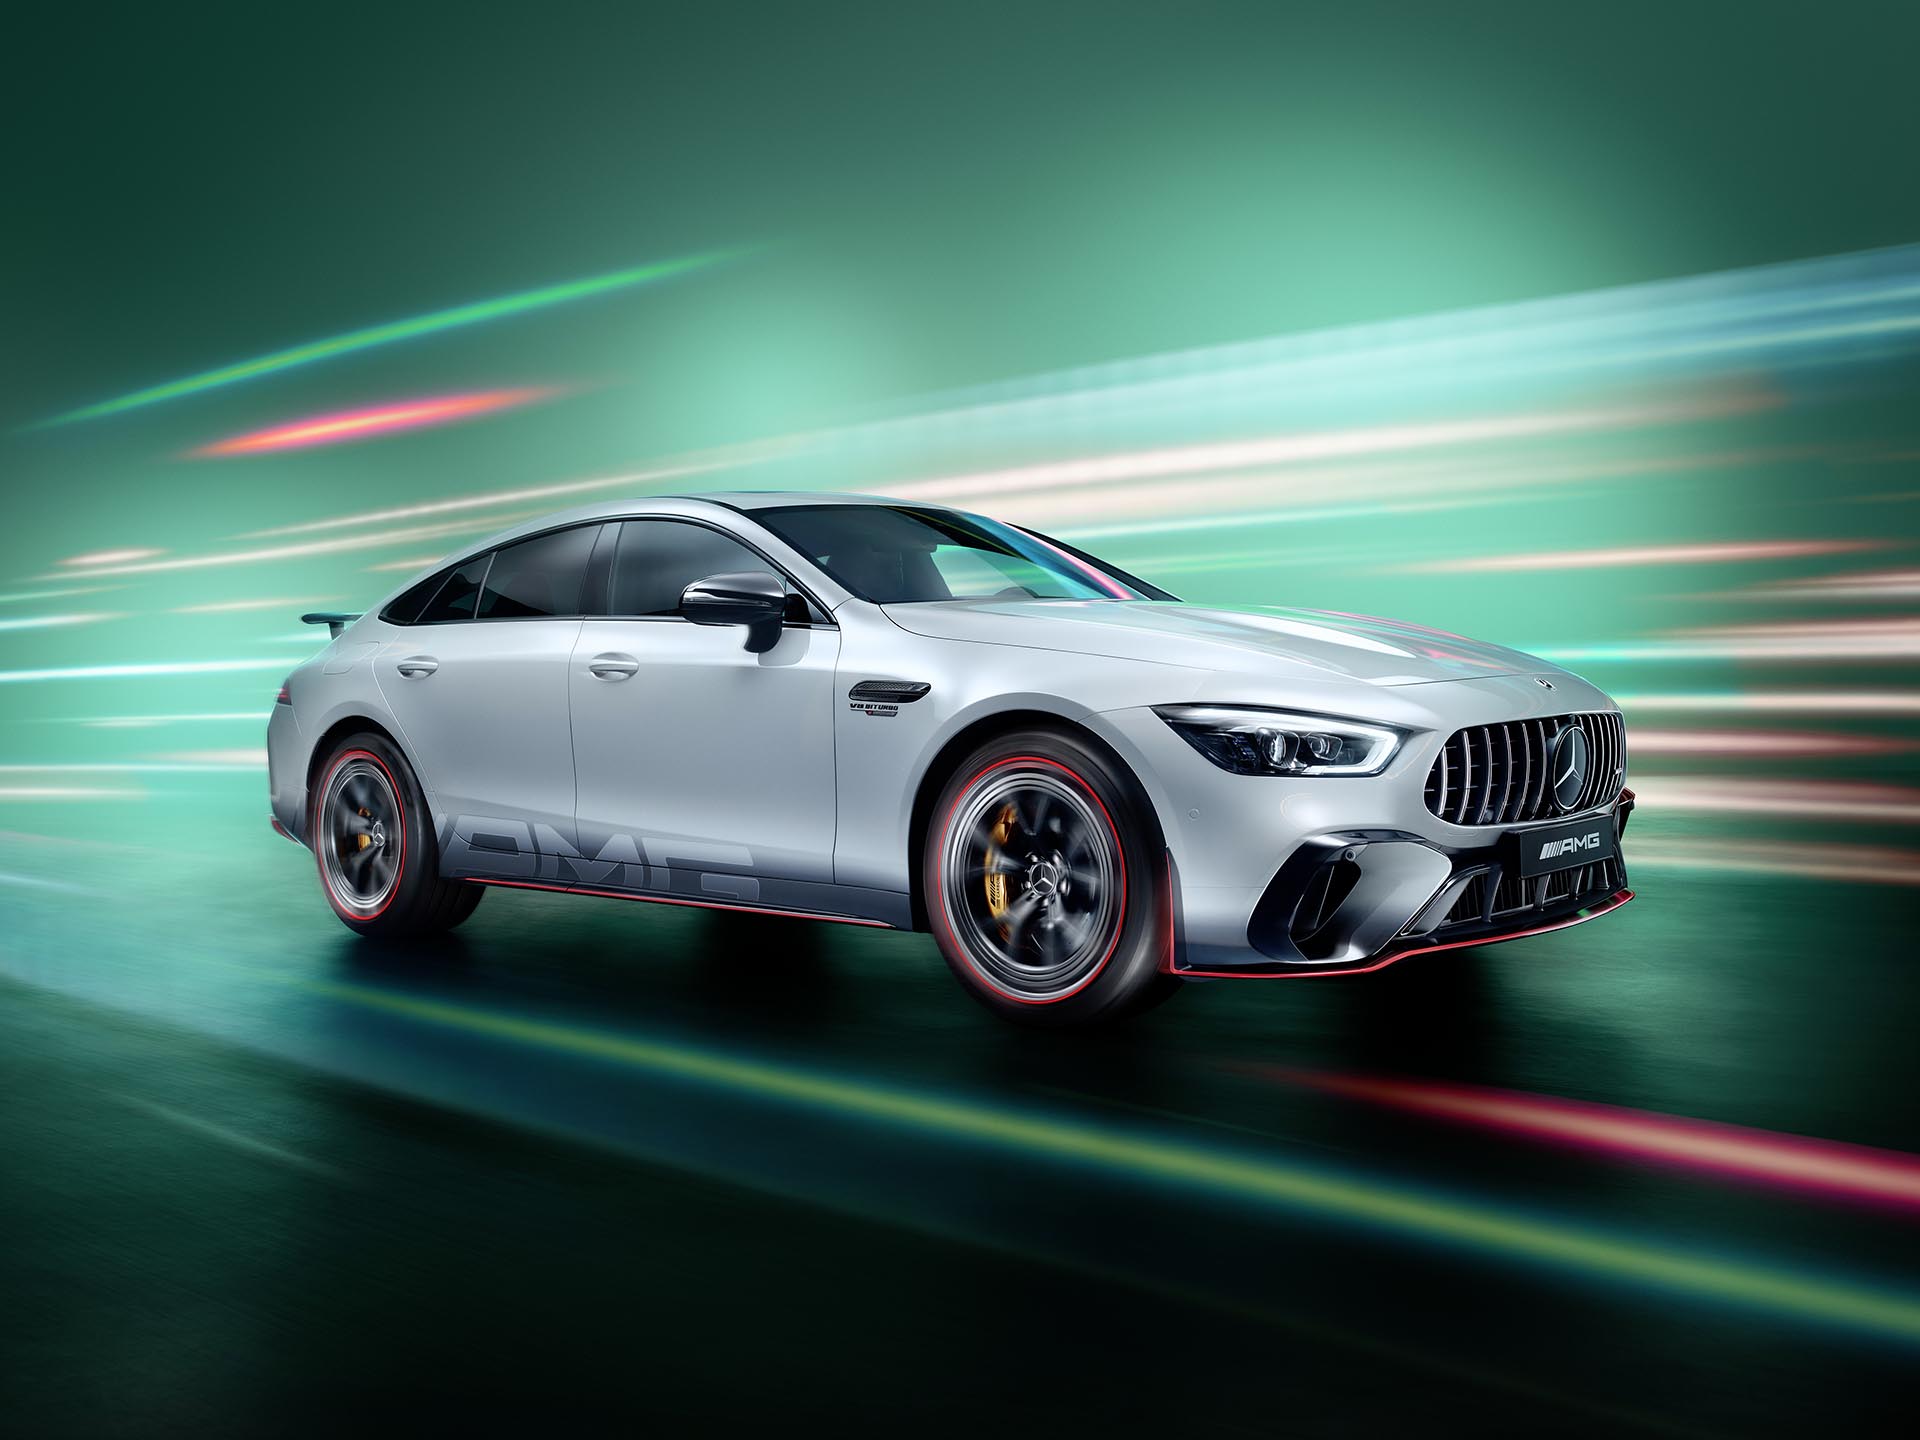 Mercedes-AMG GT 63 S E PERFORMANCE “F1 Edition”